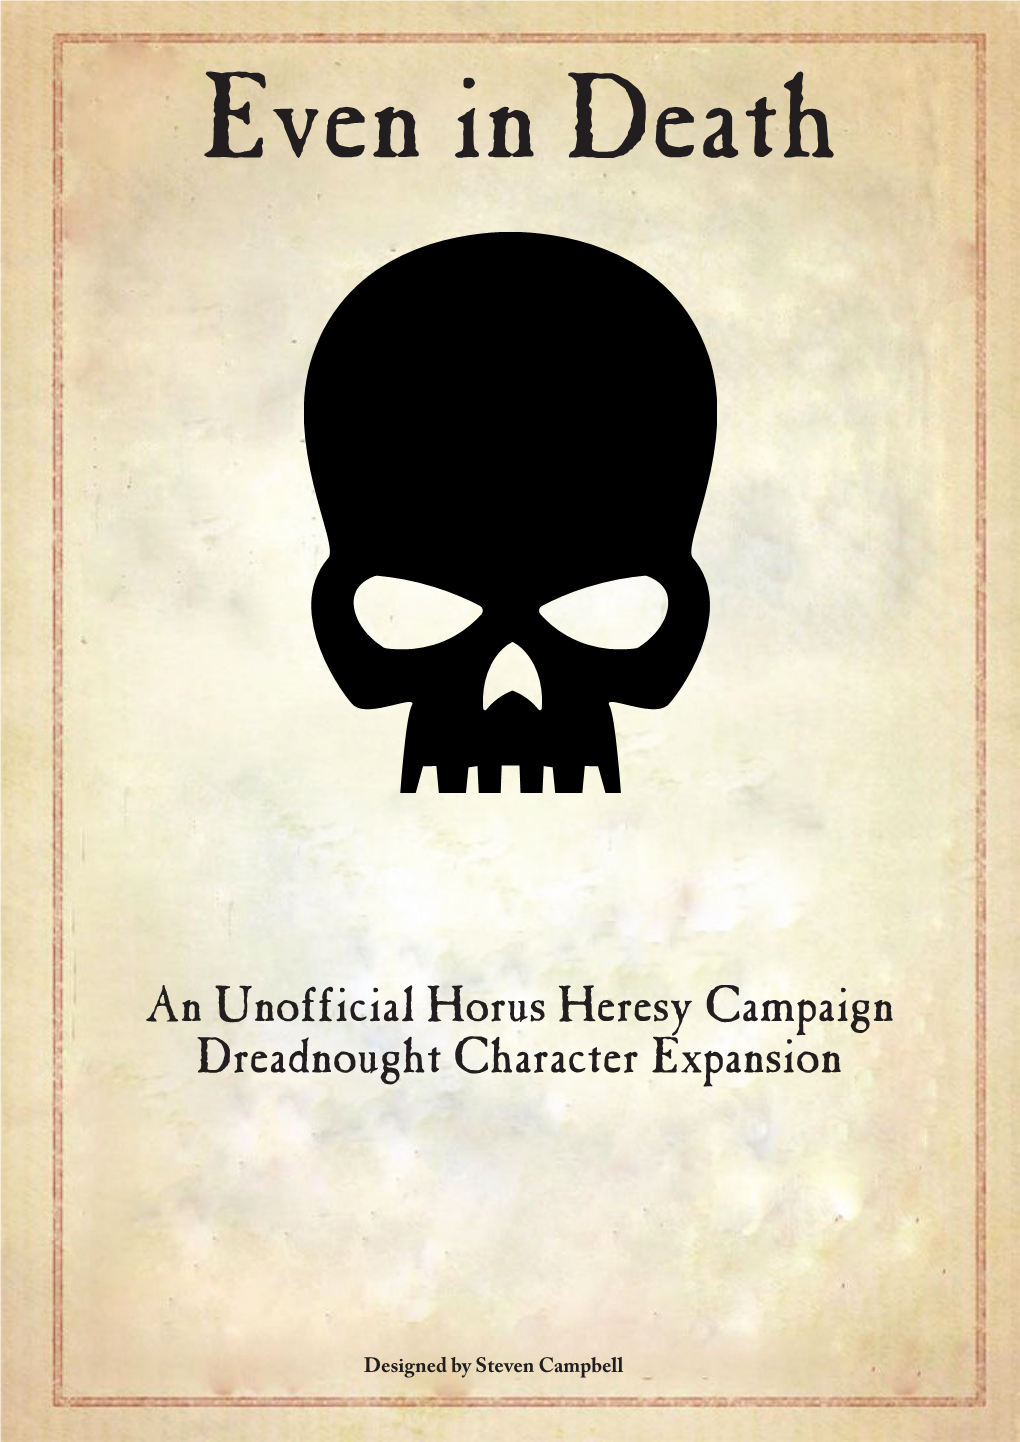 An Unofficial Horus Heresy Campaign Dreadnought Character Expansion